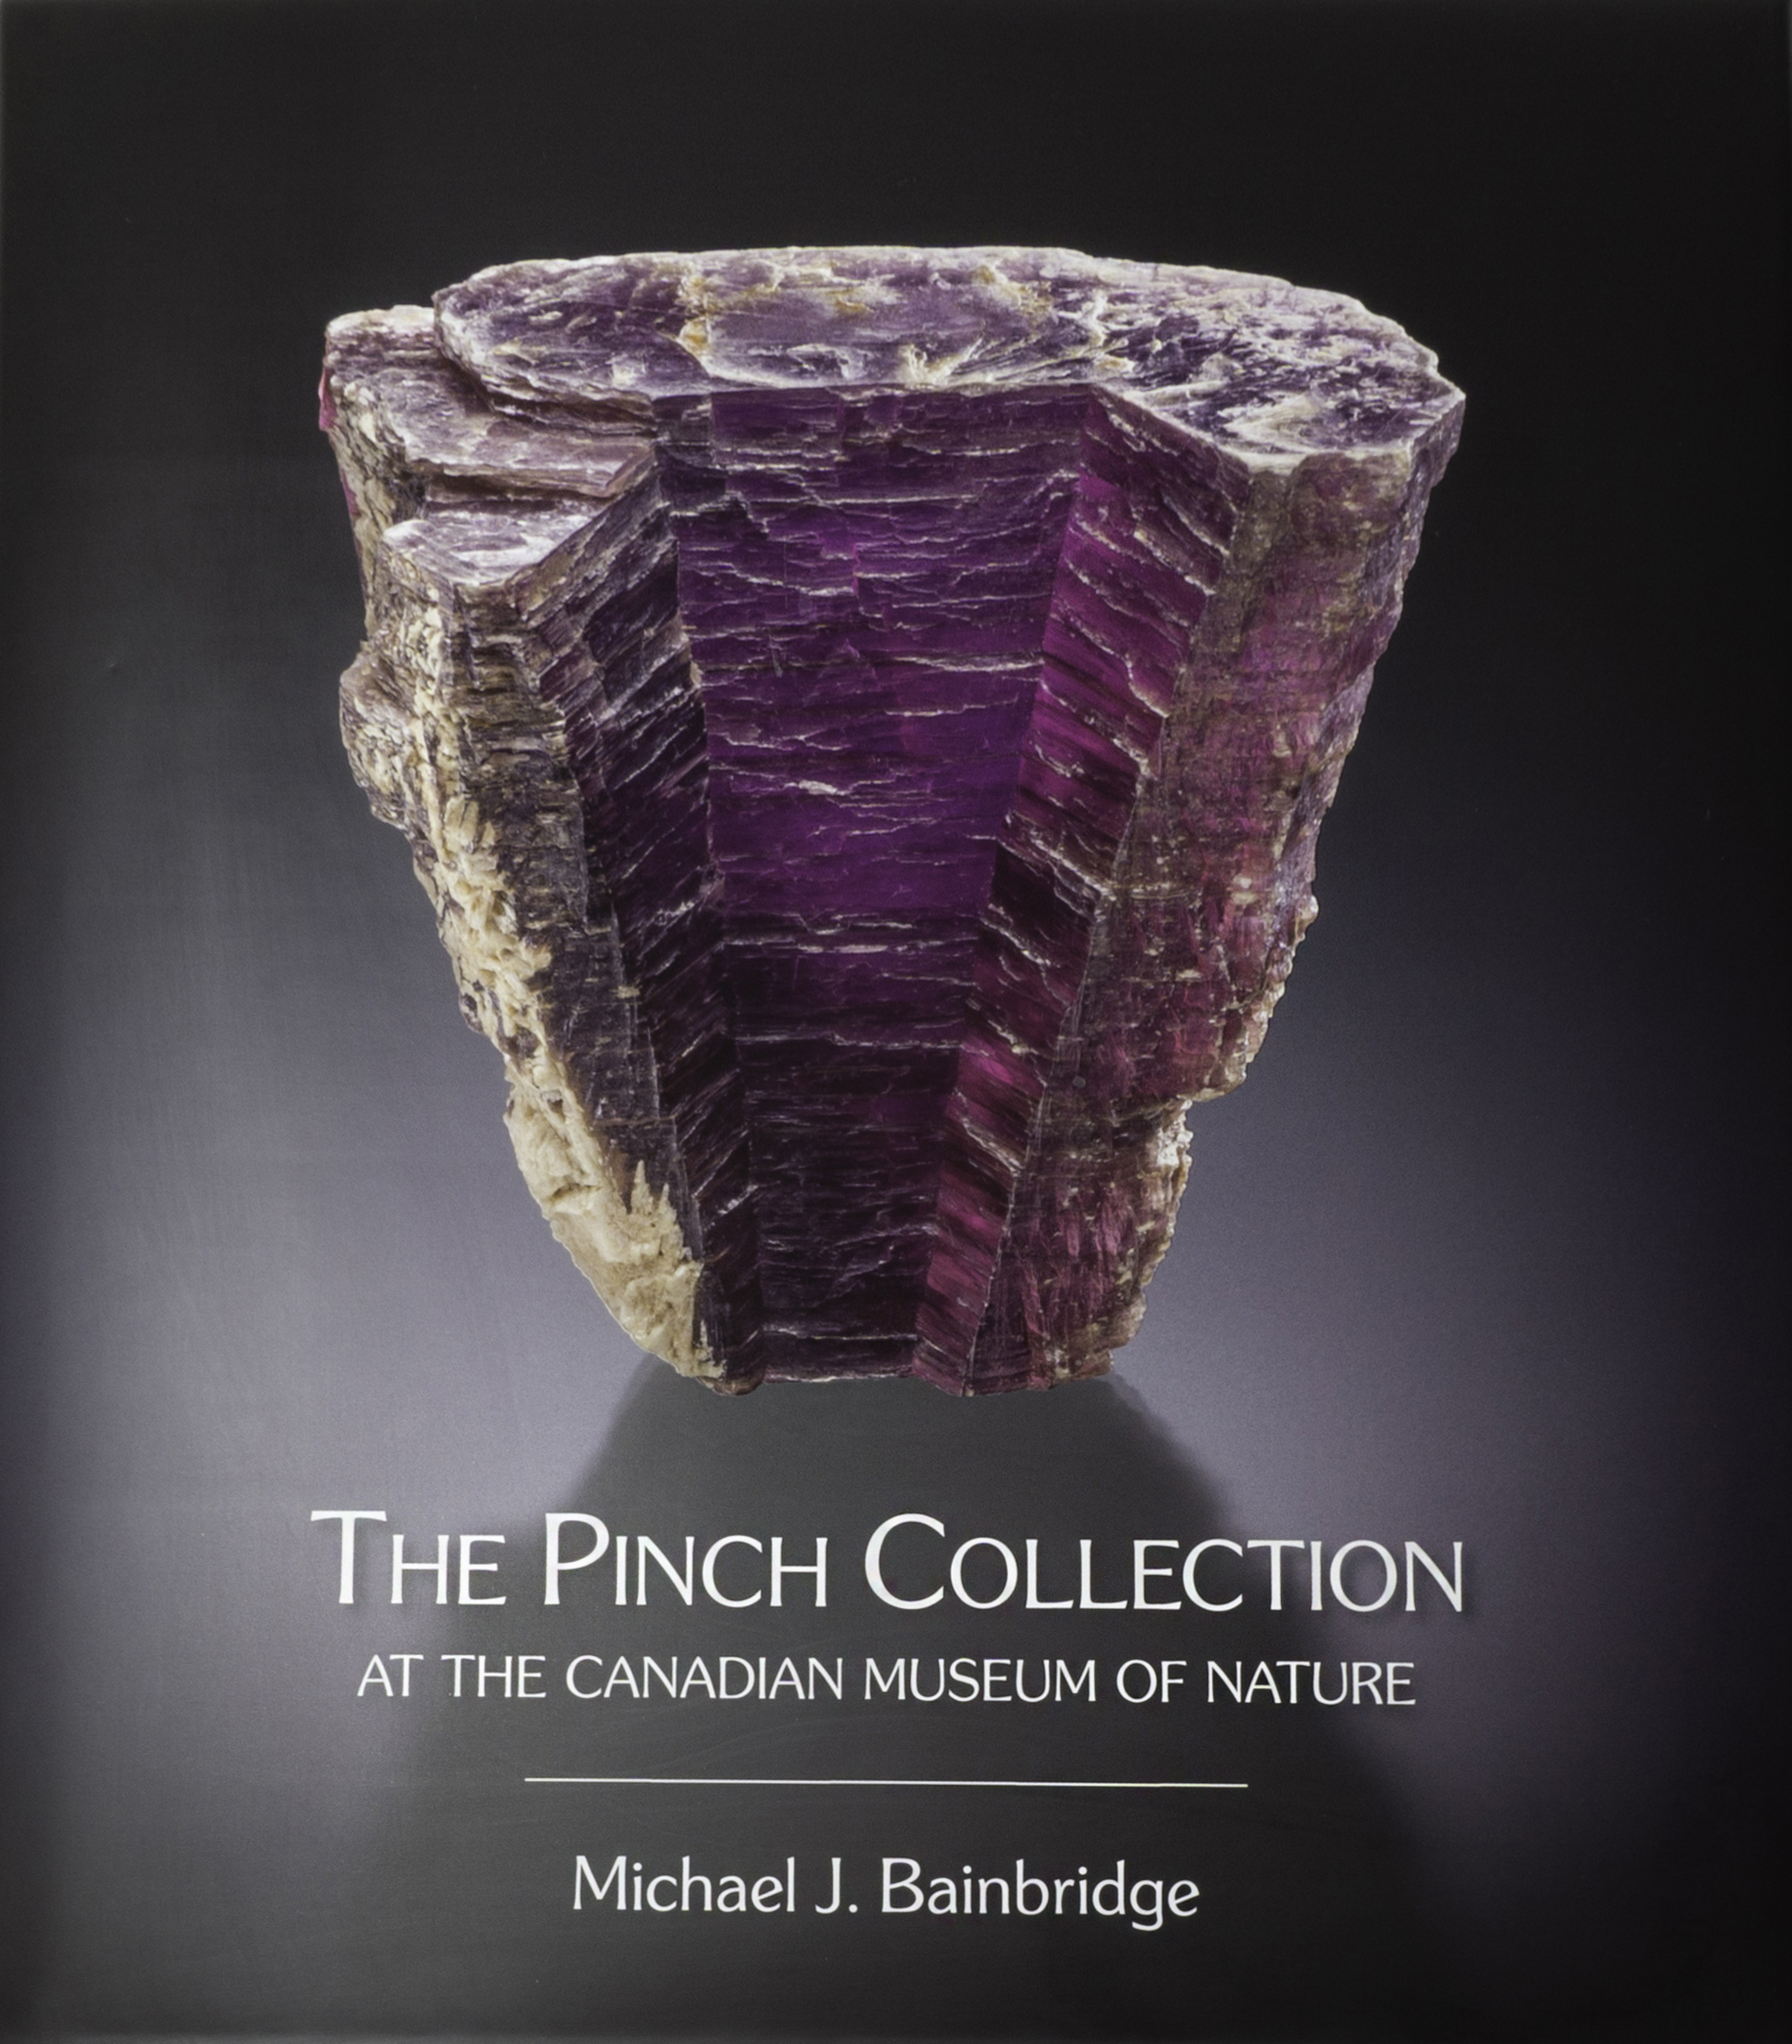 The Pinch Collection at the Canadian Museum of Nature